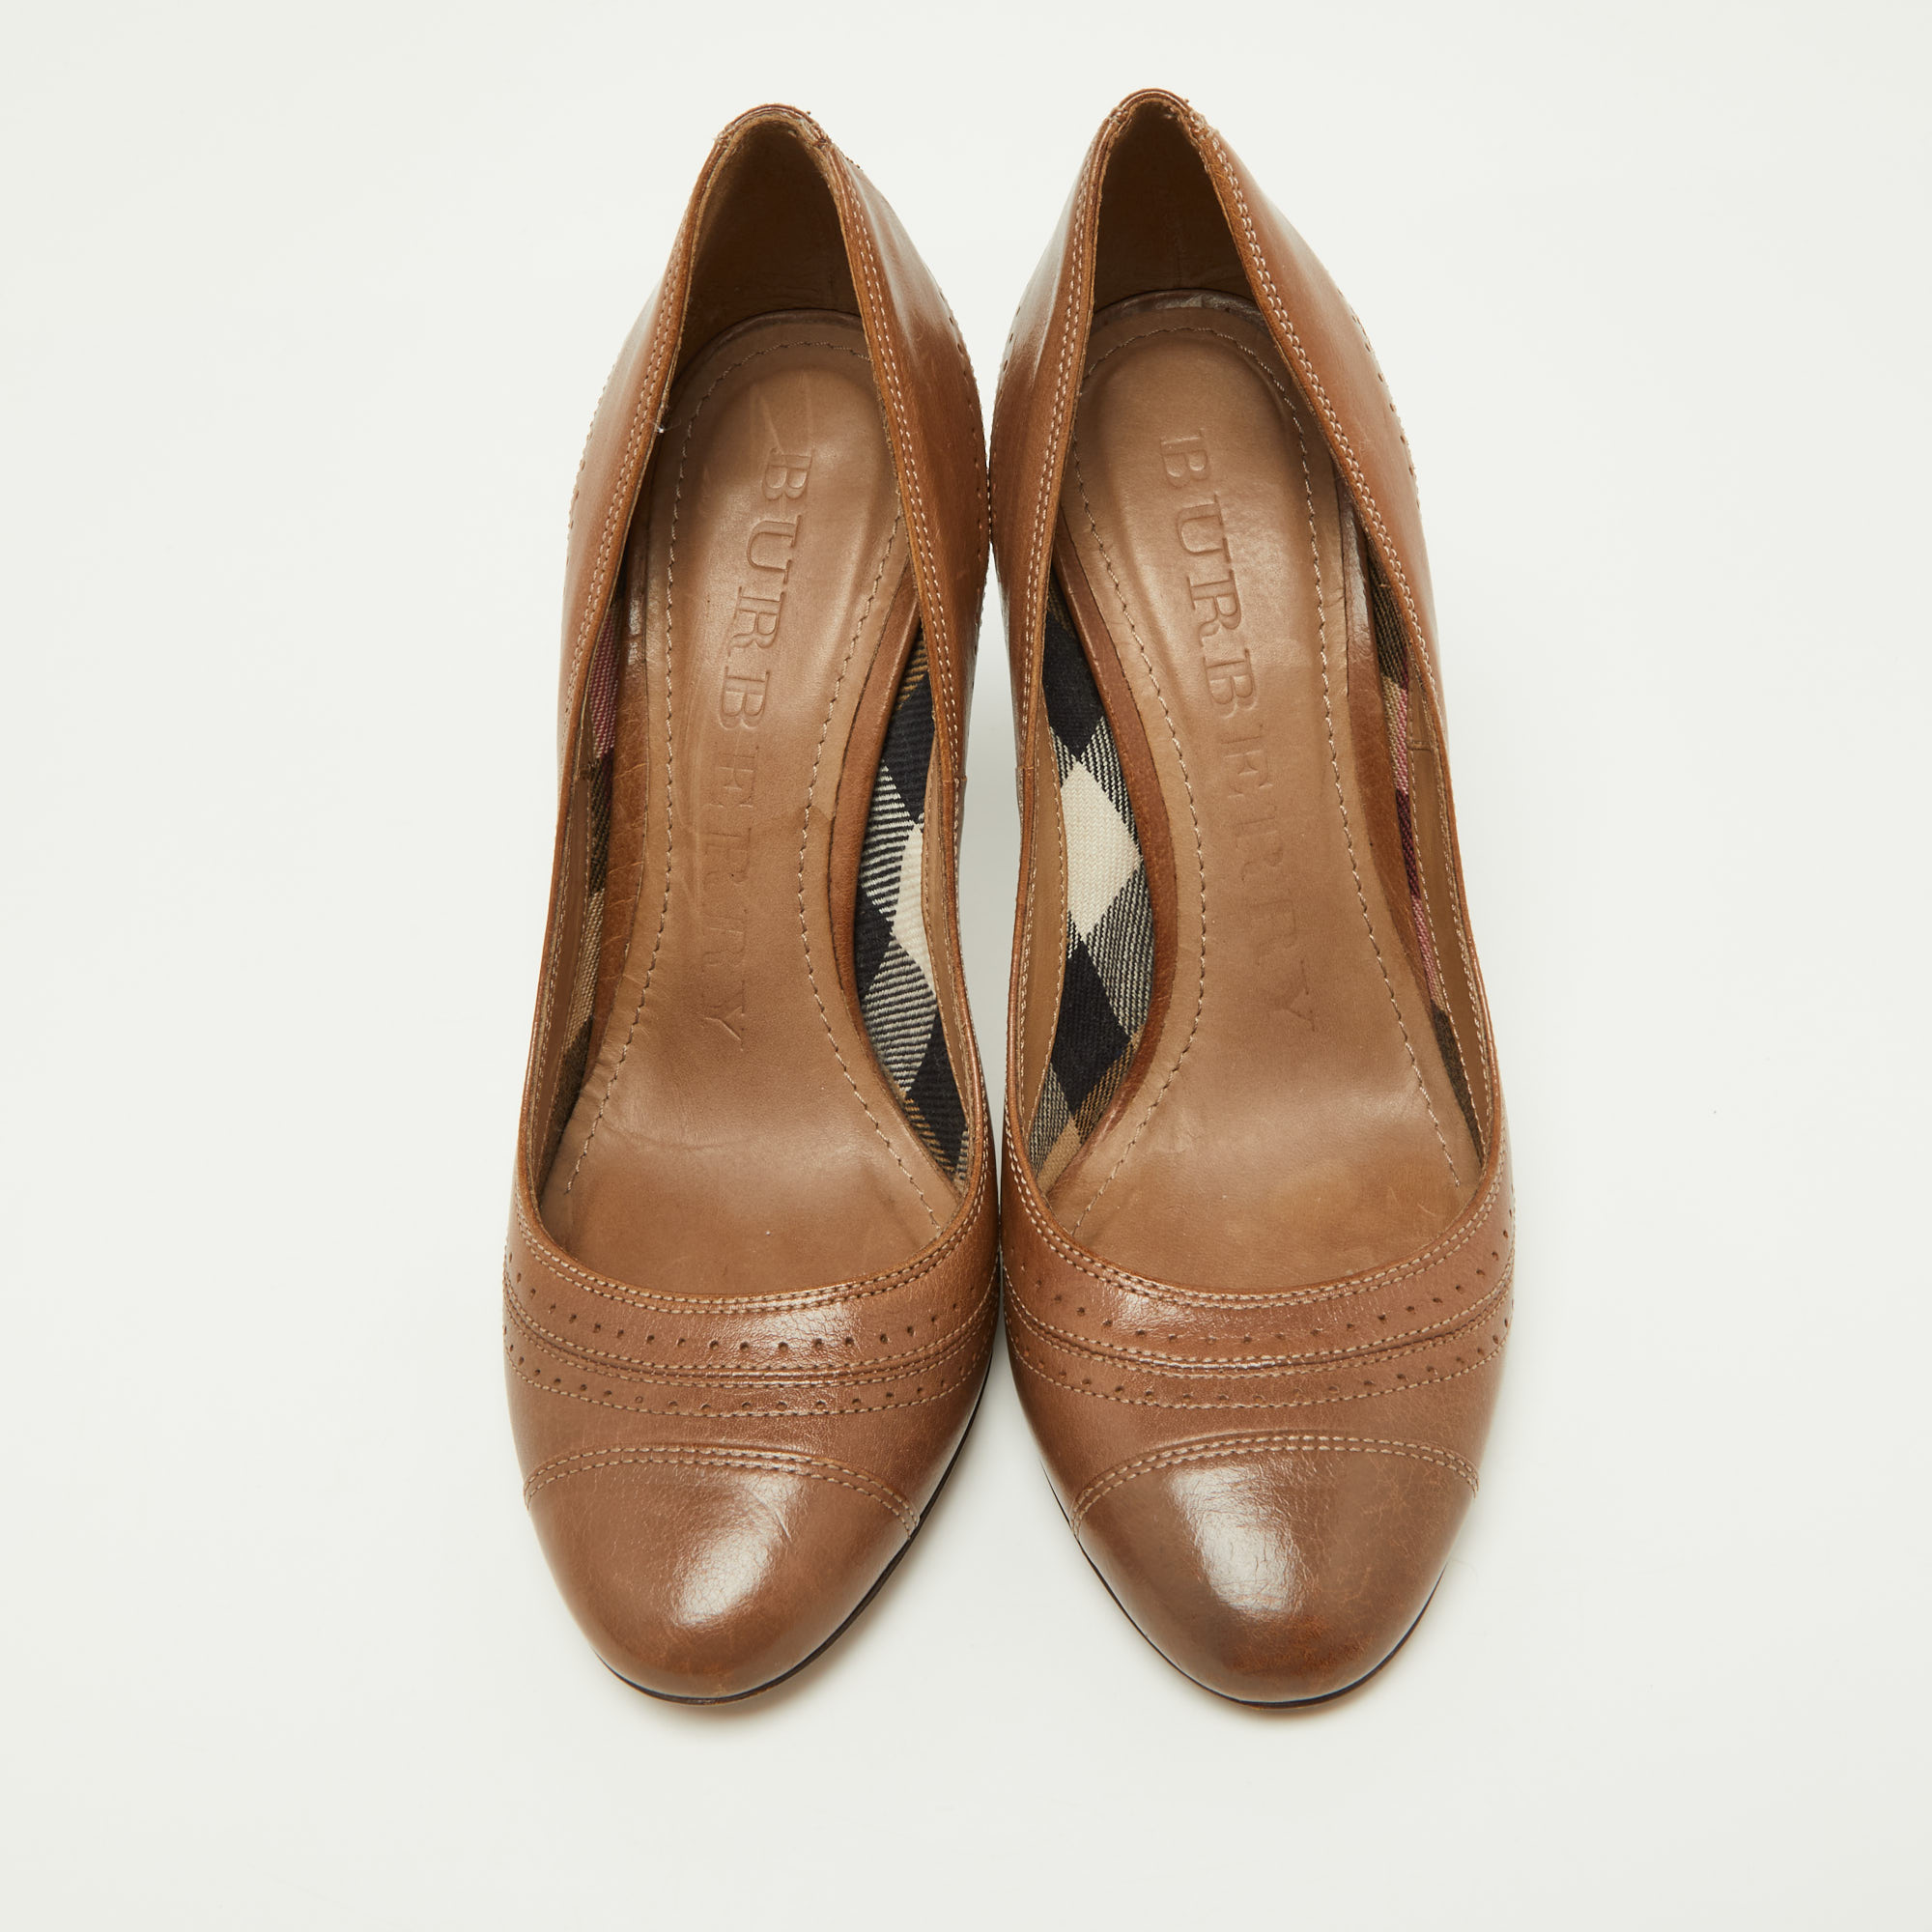 Burberry Brown Leather Round Toe Pumps Size 36